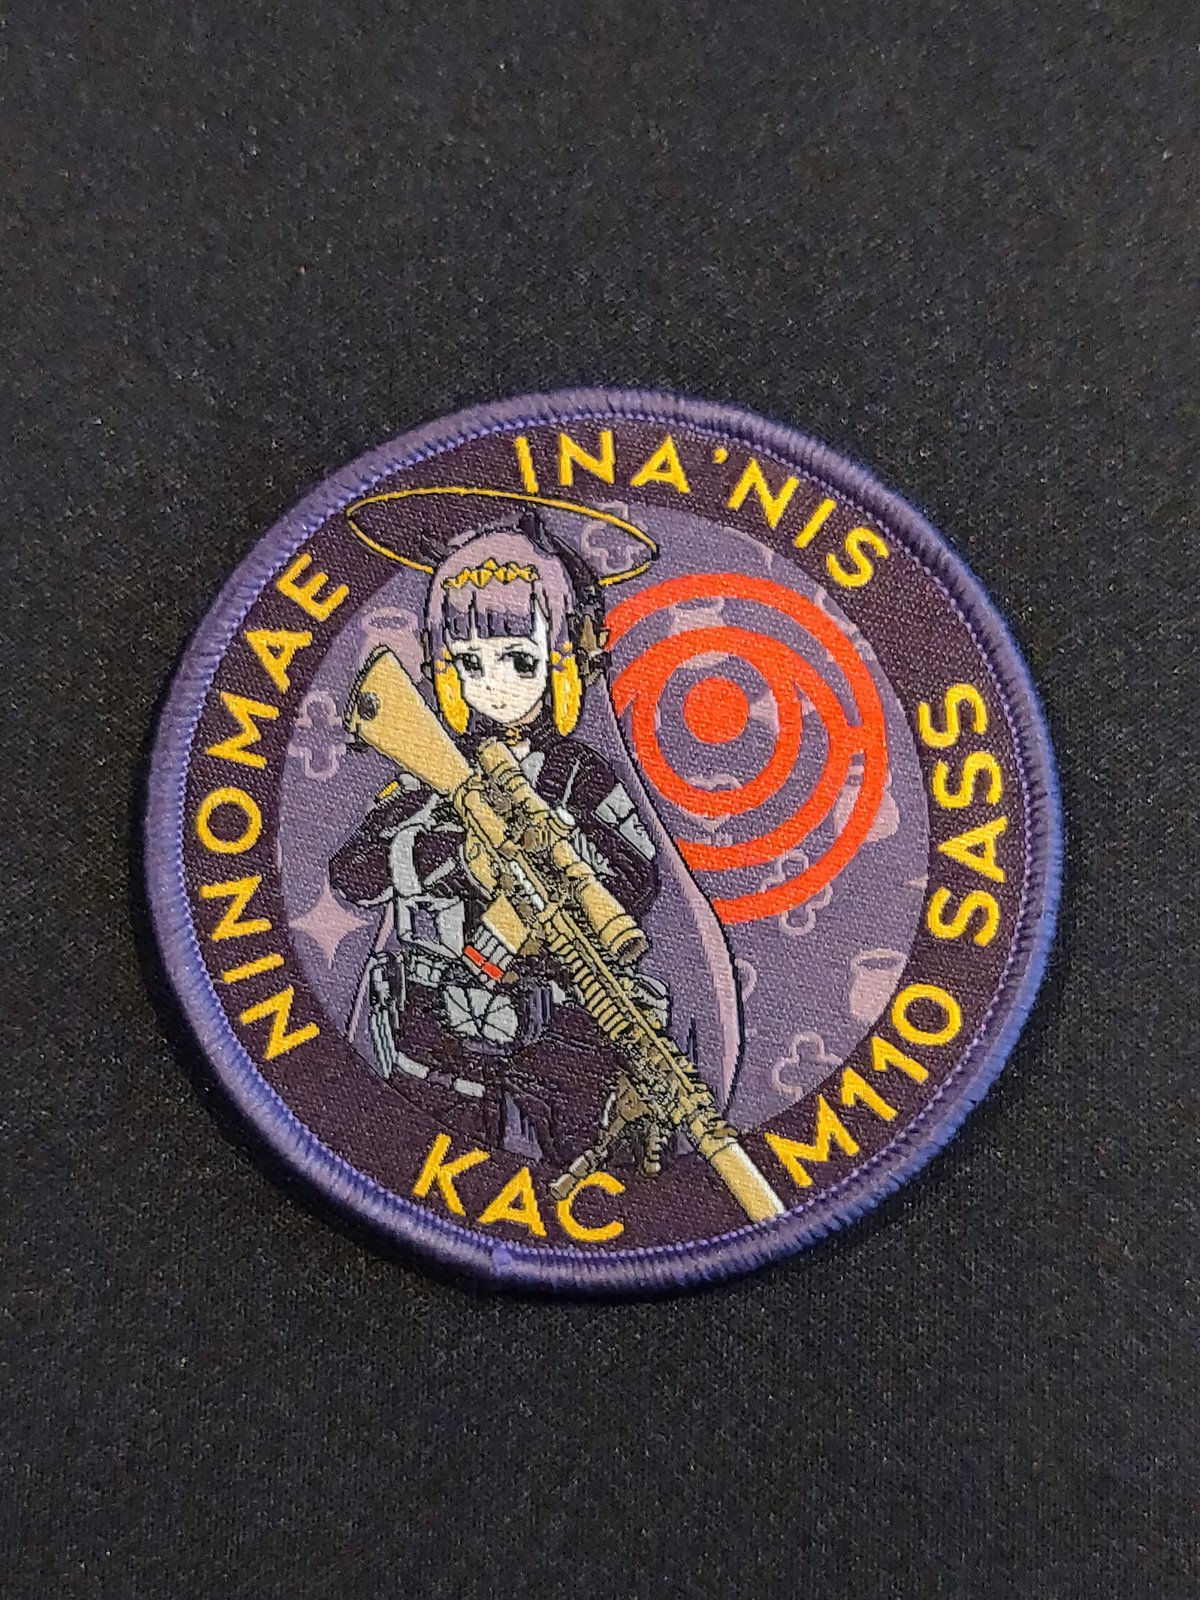 Pin on Tactical patches